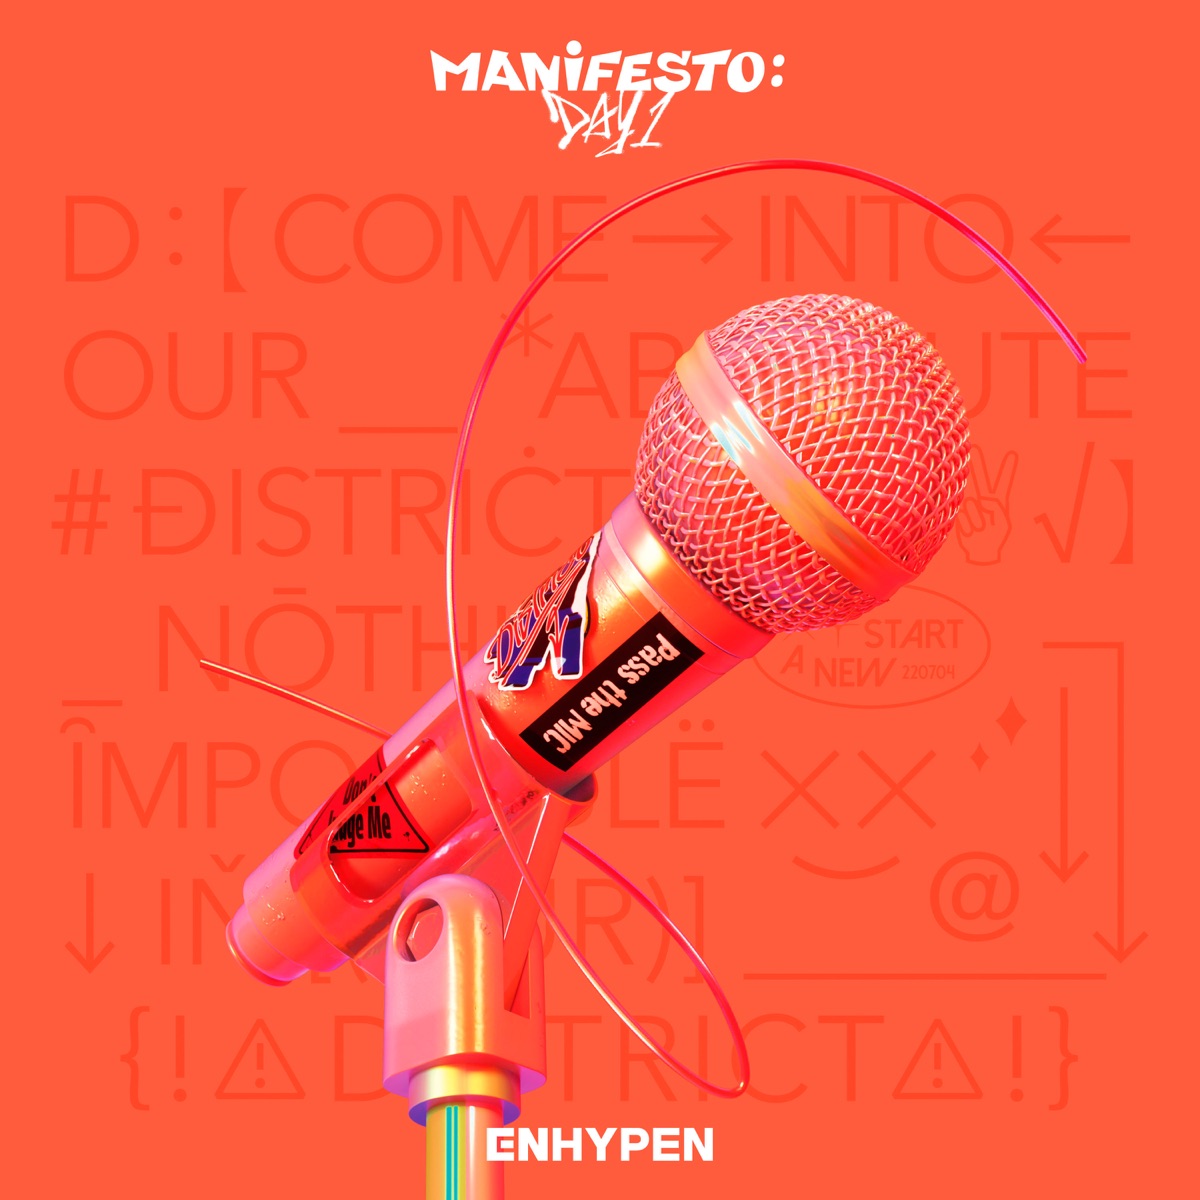 Cover art for『ENHYPEN - WALK THE LINE』from the release『MANIFESTO : DAY 1』